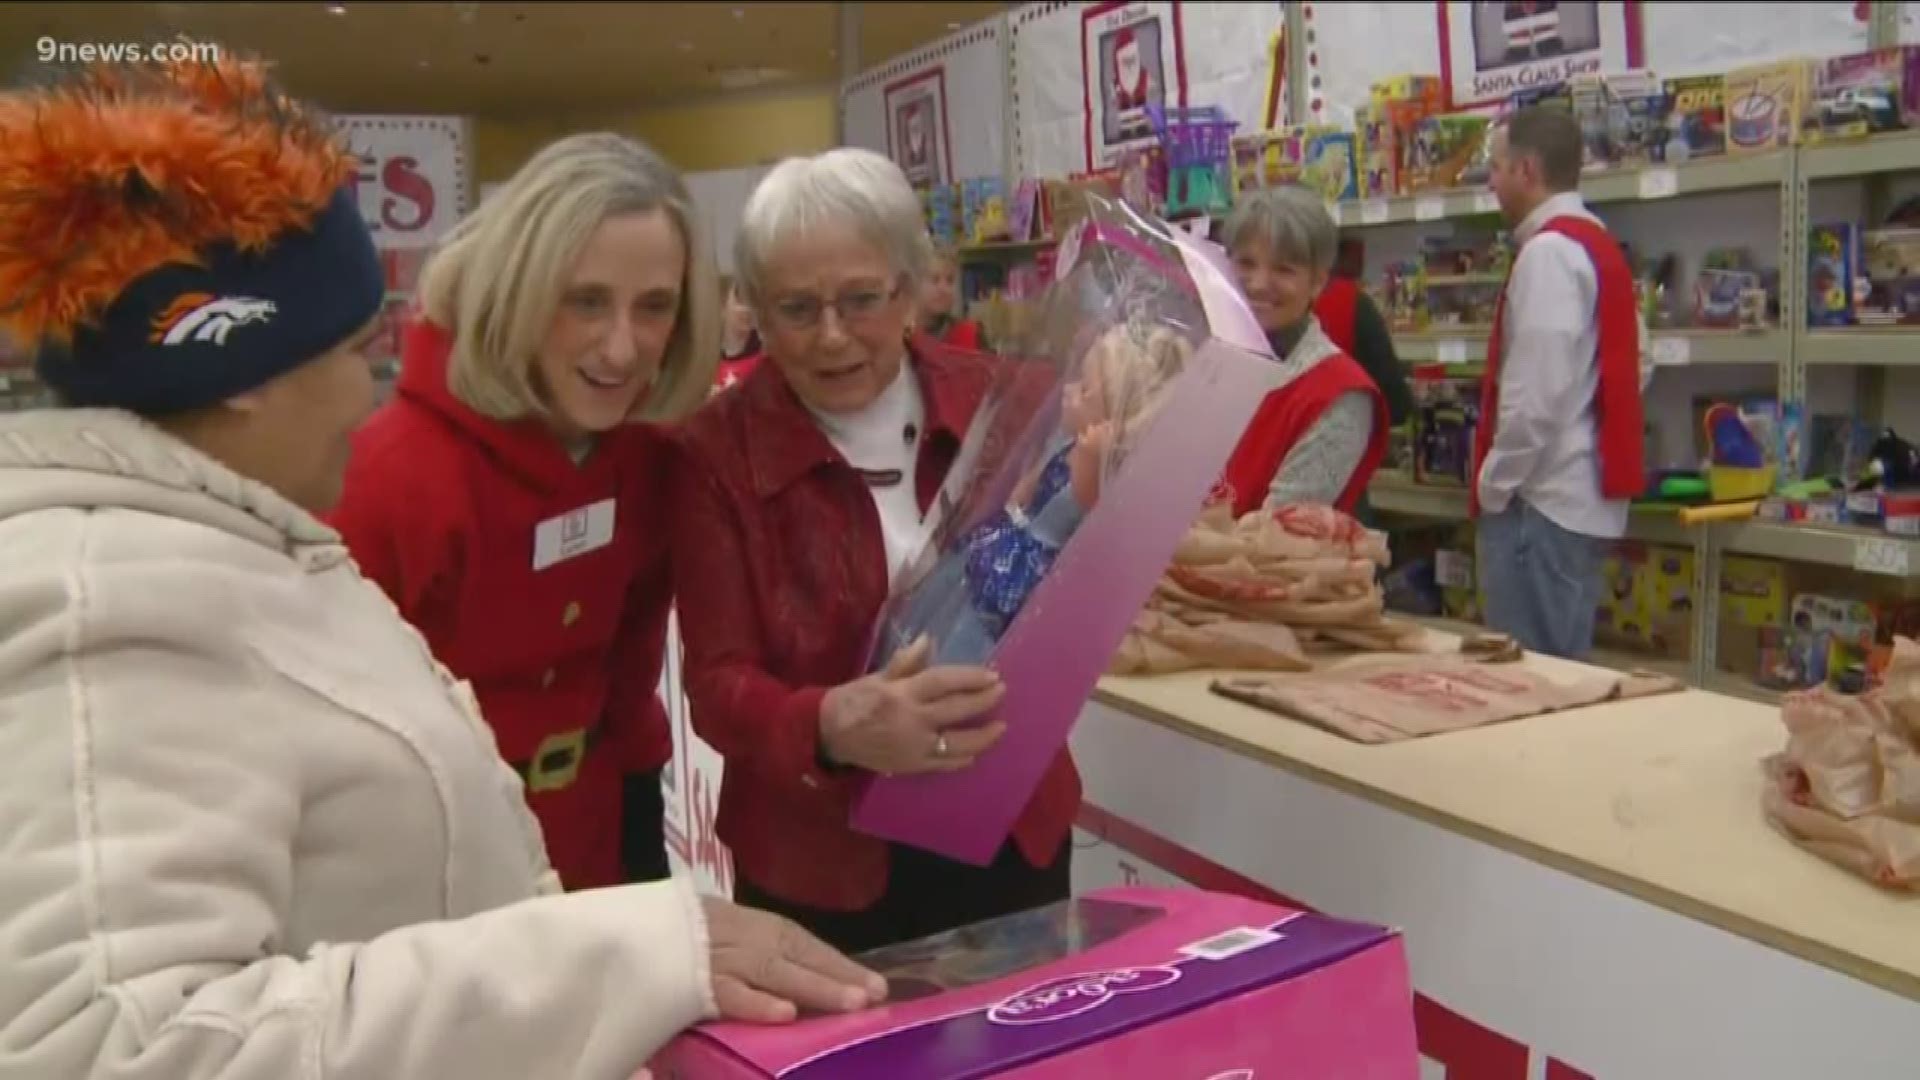 Gene Koelbel passed away in 2016 at the age of 90. But her entire family has carried on her legacy at the Denver Santa Claus Toy Shop.